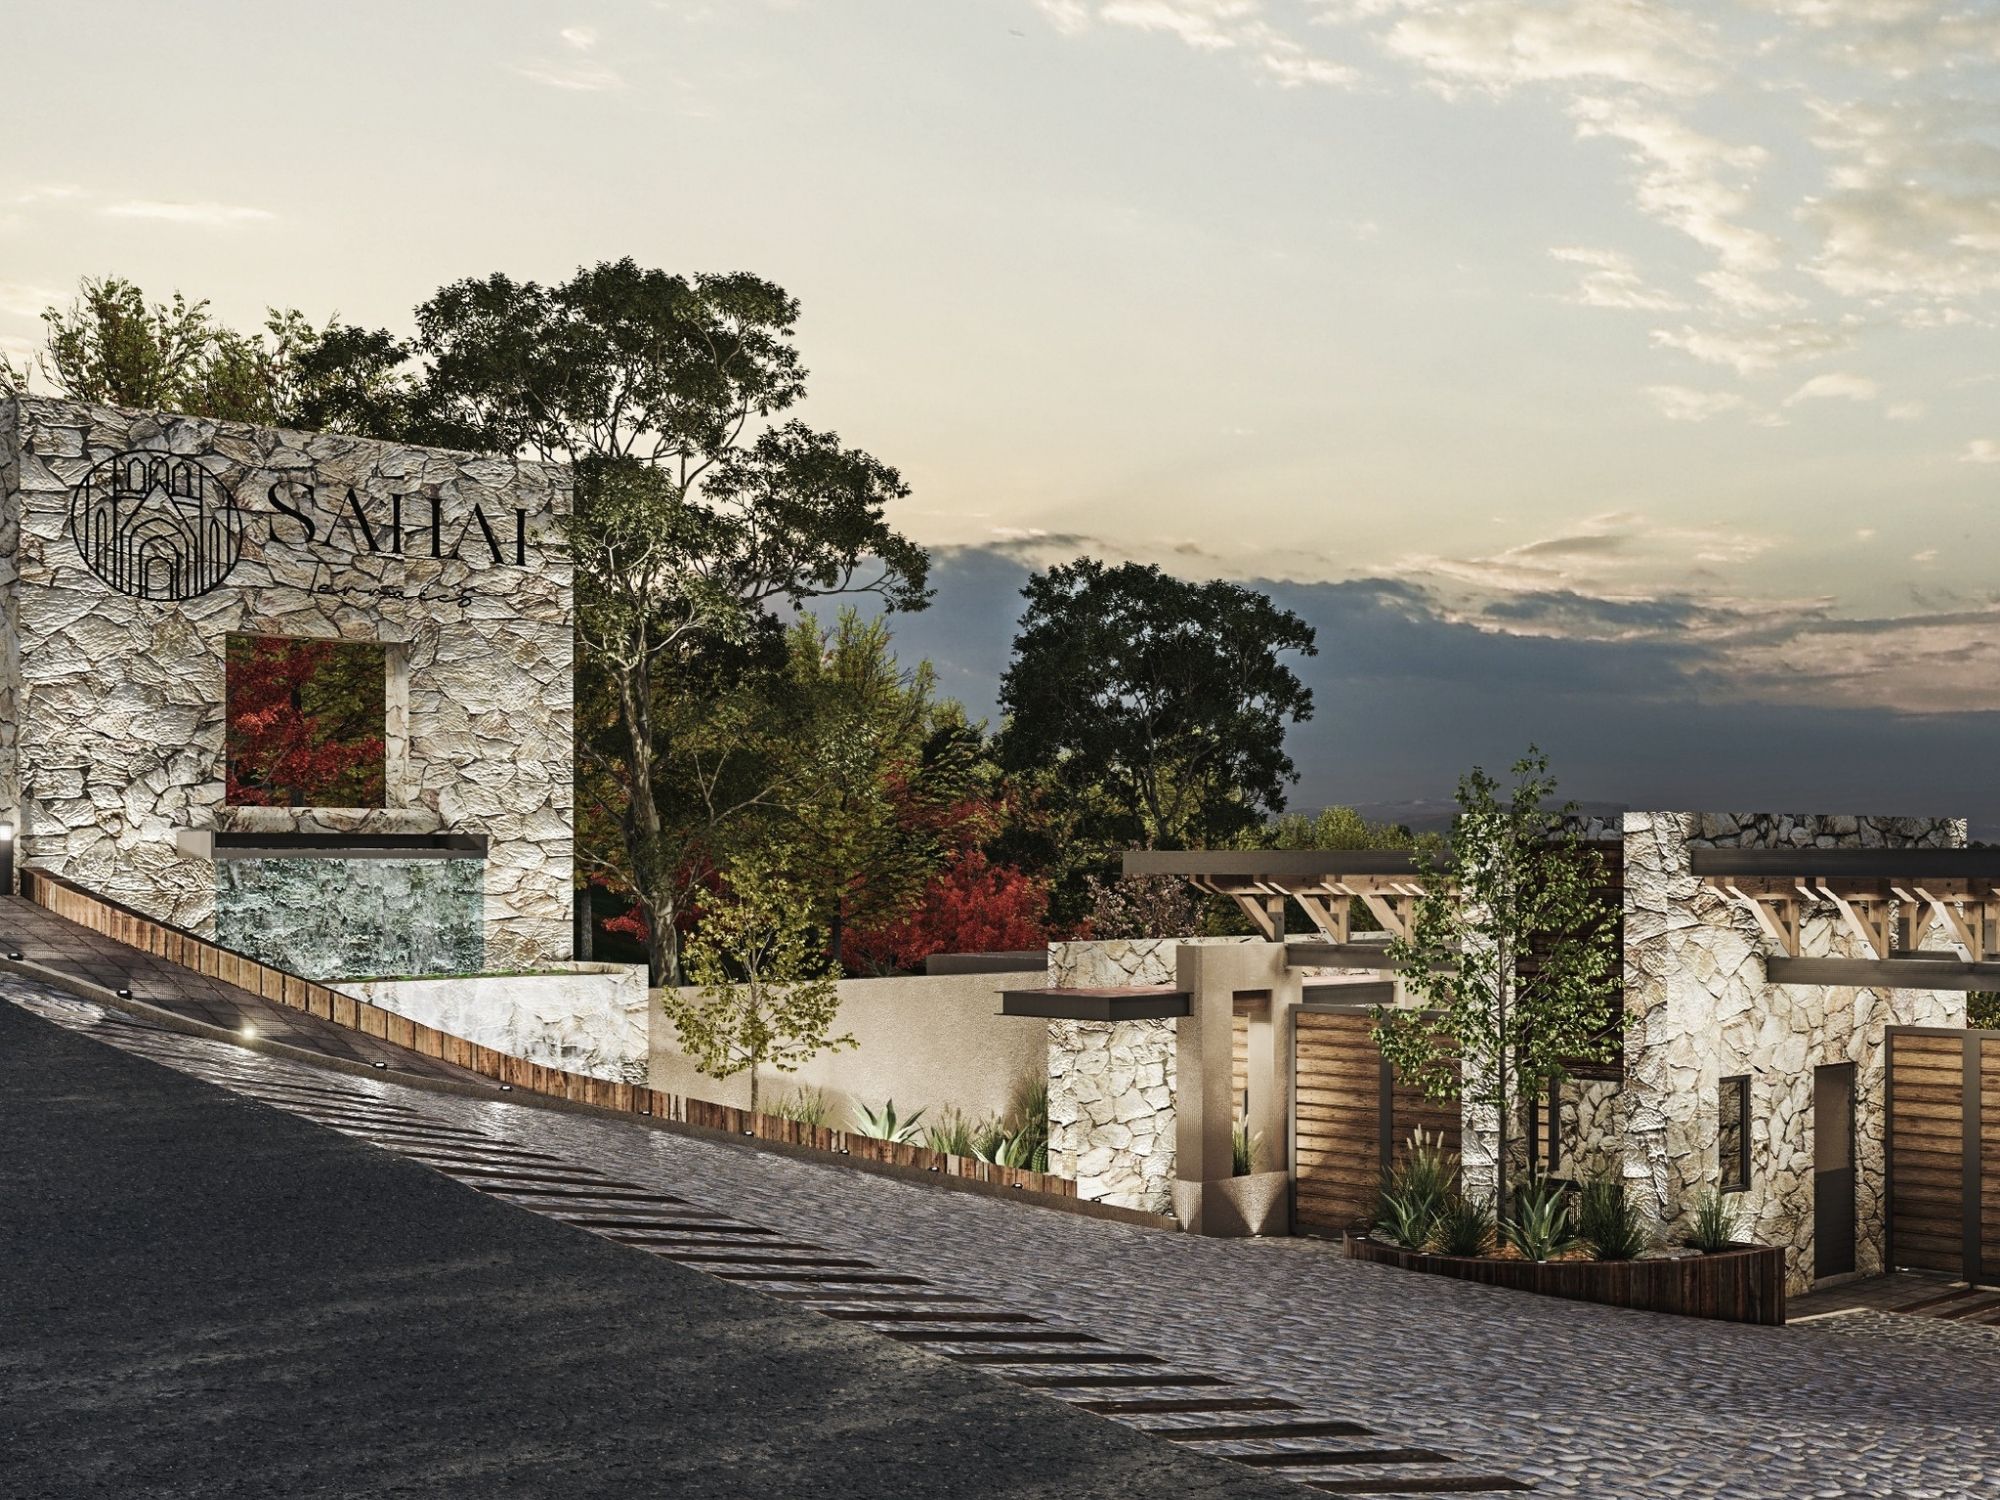 437 sqm residential lot with clubhouse, for sale in San Miguel de Allende.